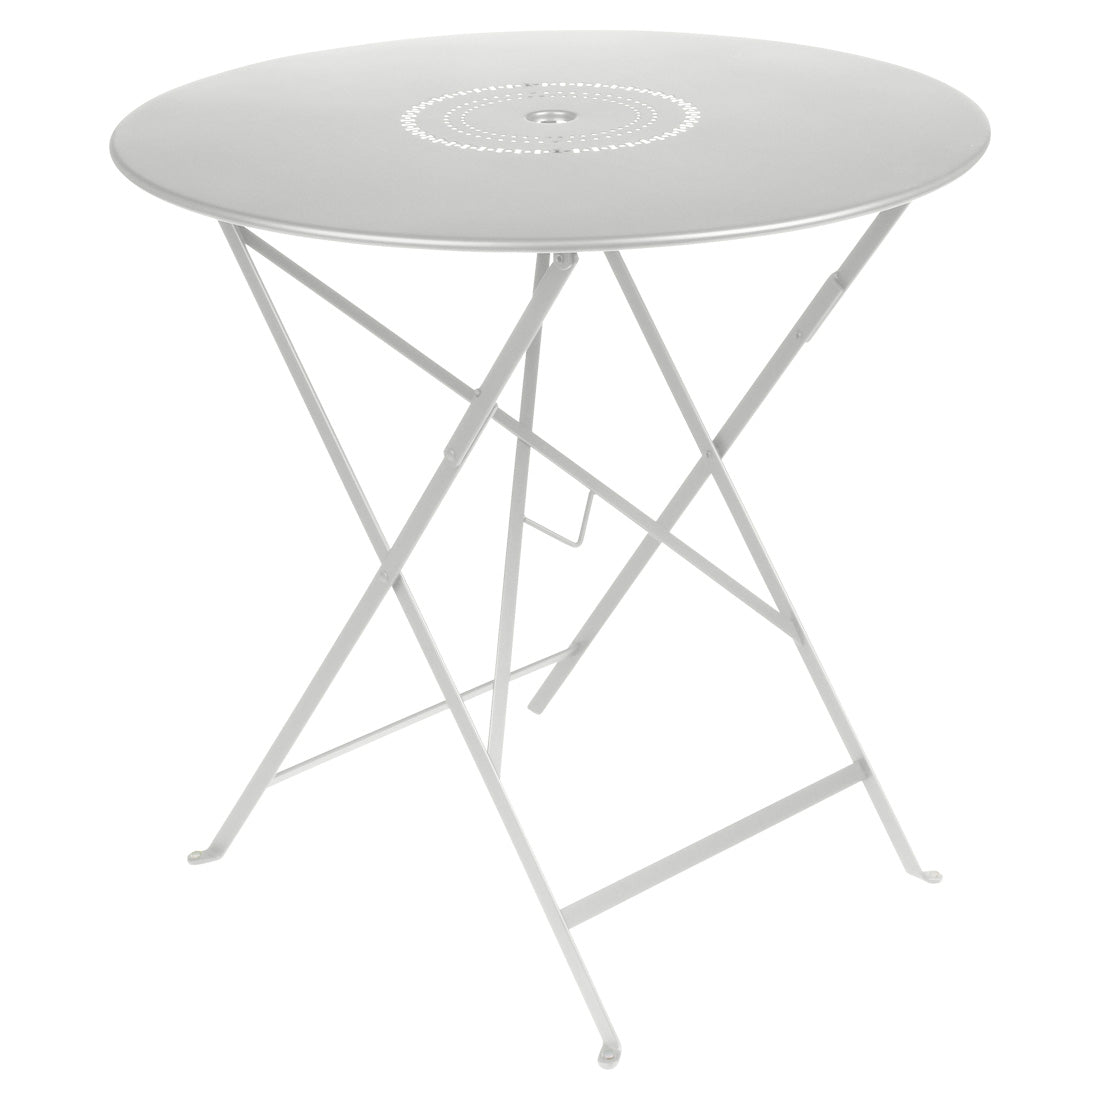 Fermob Floreal 30.5" Round Dining Table